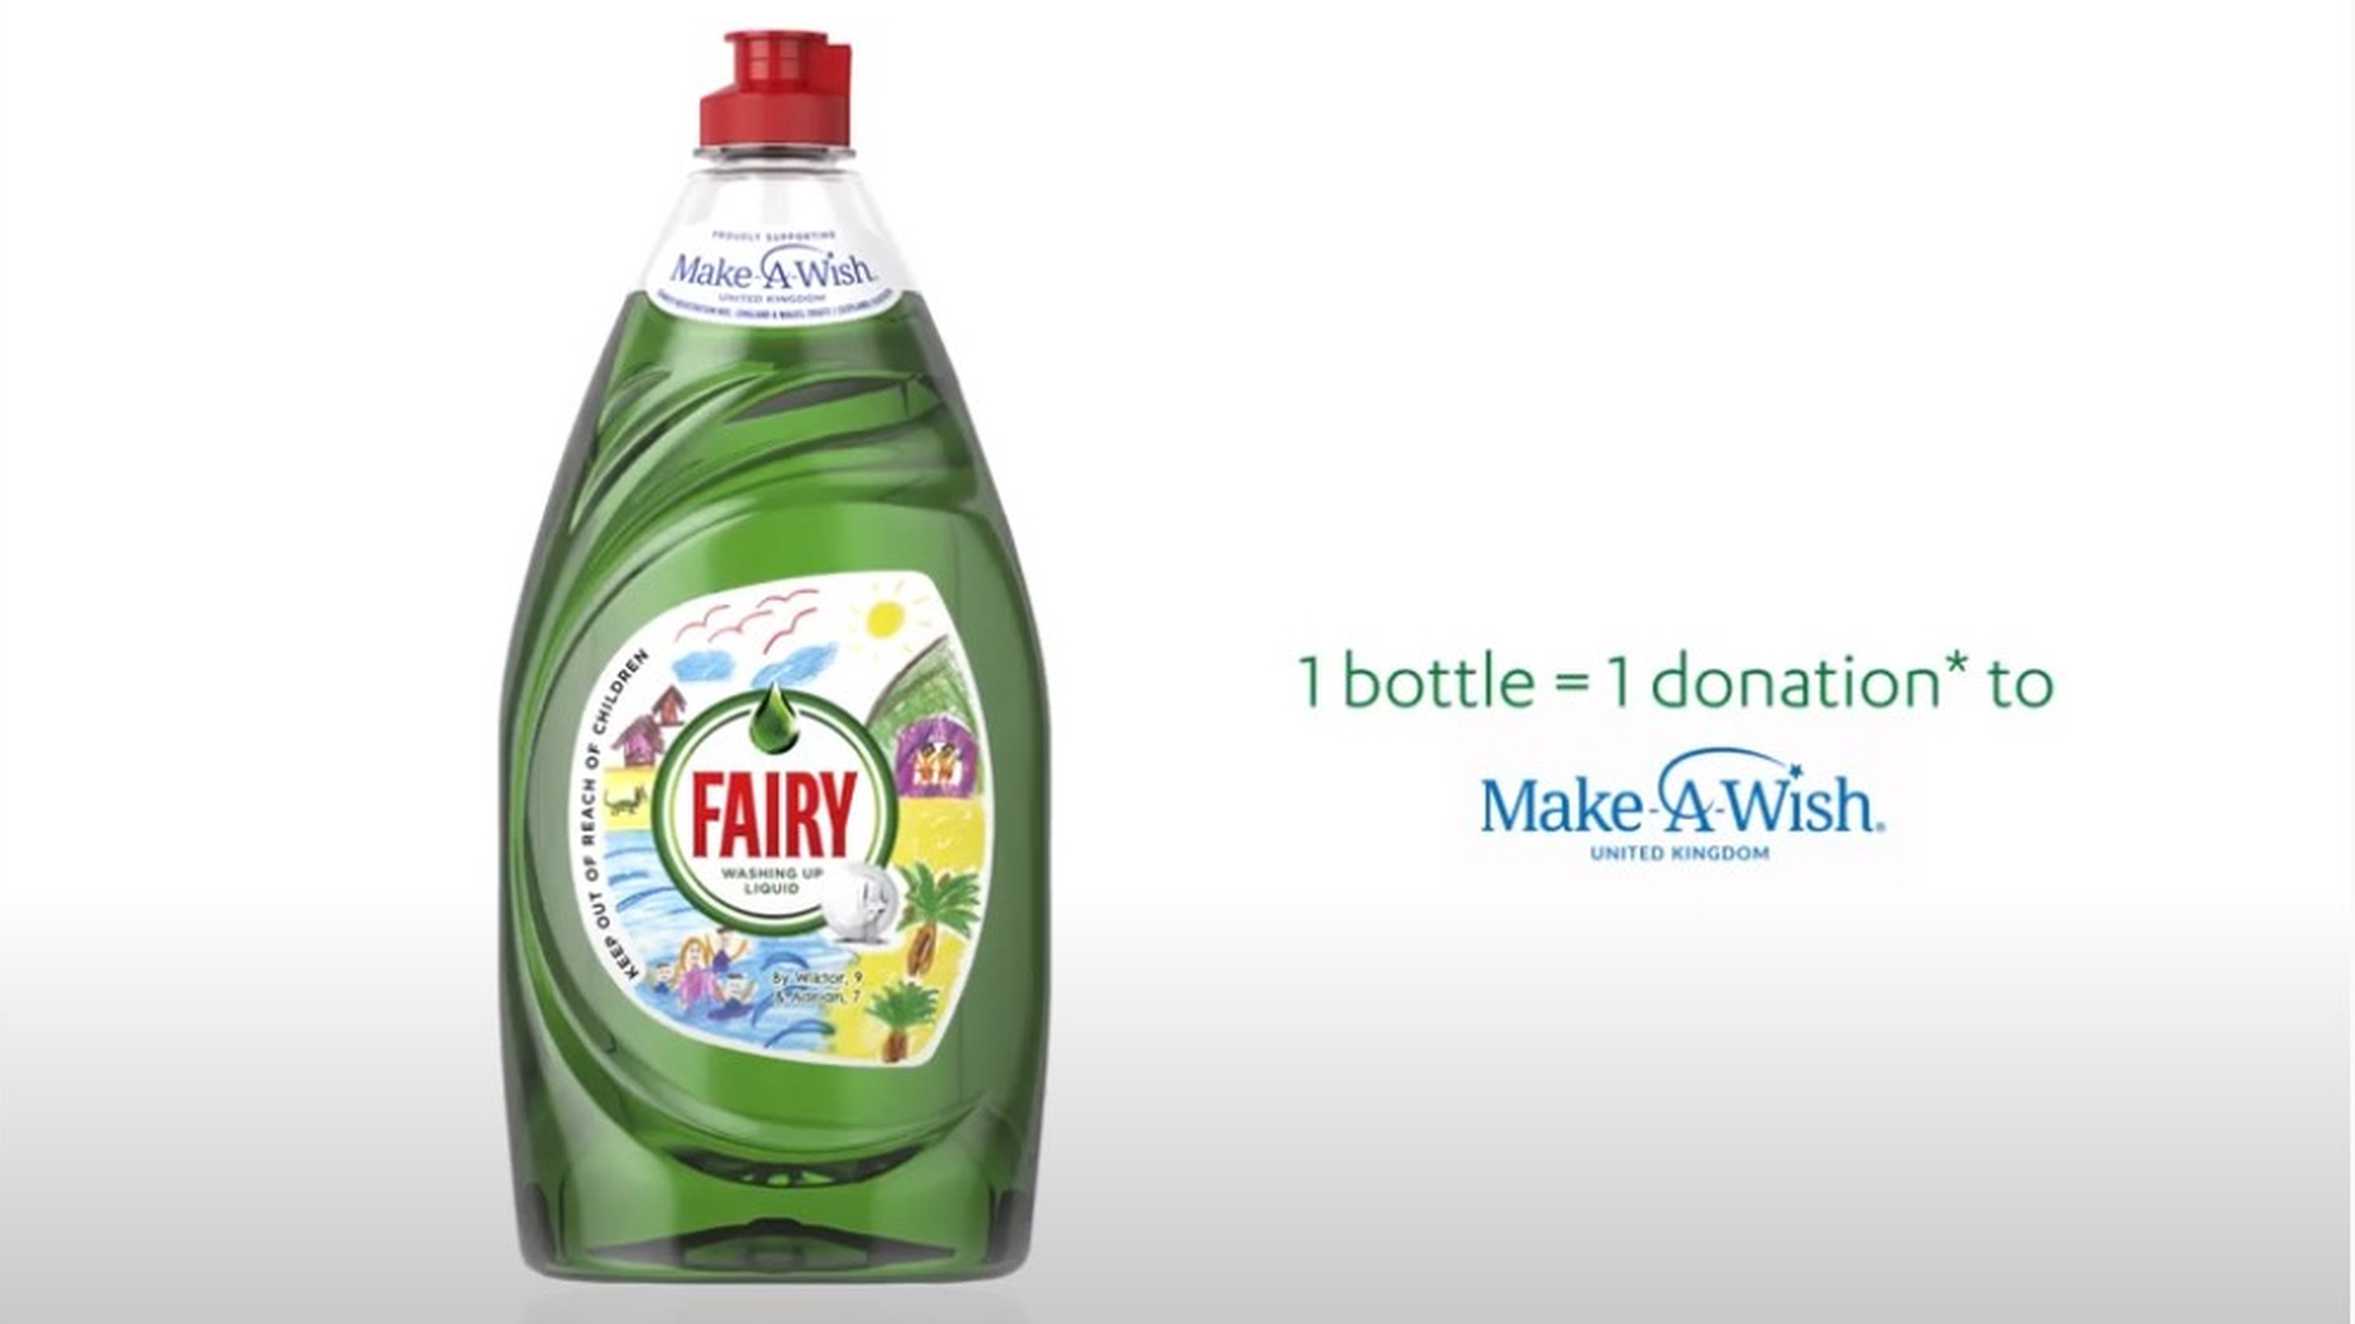 A limited edition fairy liquid bottle, designed by wish child, Wiktor.